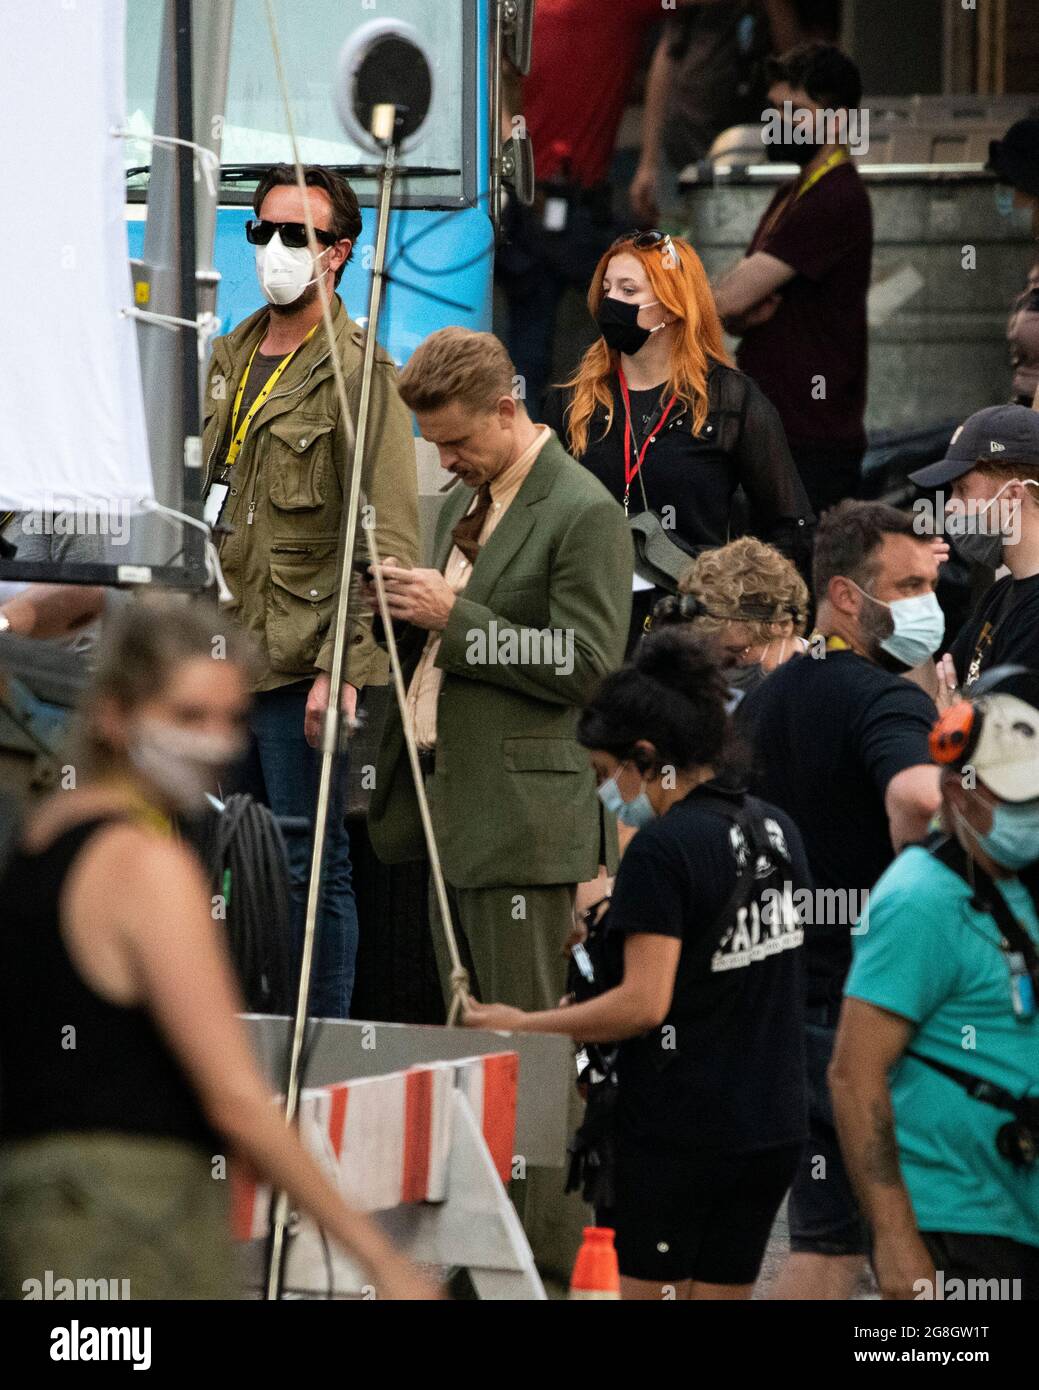 Glasgow, Scotland, UK. 20th July, 2021. PICTURED: Boyd Holbrook seen in between takes on set. Filming on the set of Indiana Jones 5 in the middle of Glasgow city centre as the Hollywood blockbuster sets up Glasgow as New York City. A full production can be seen, with a large cast, producers and extras. The city centre has been changed so that all the shop fronts and building look like 1959 America. Credit: Colin Fisher/Alamy Live News Stock Photo